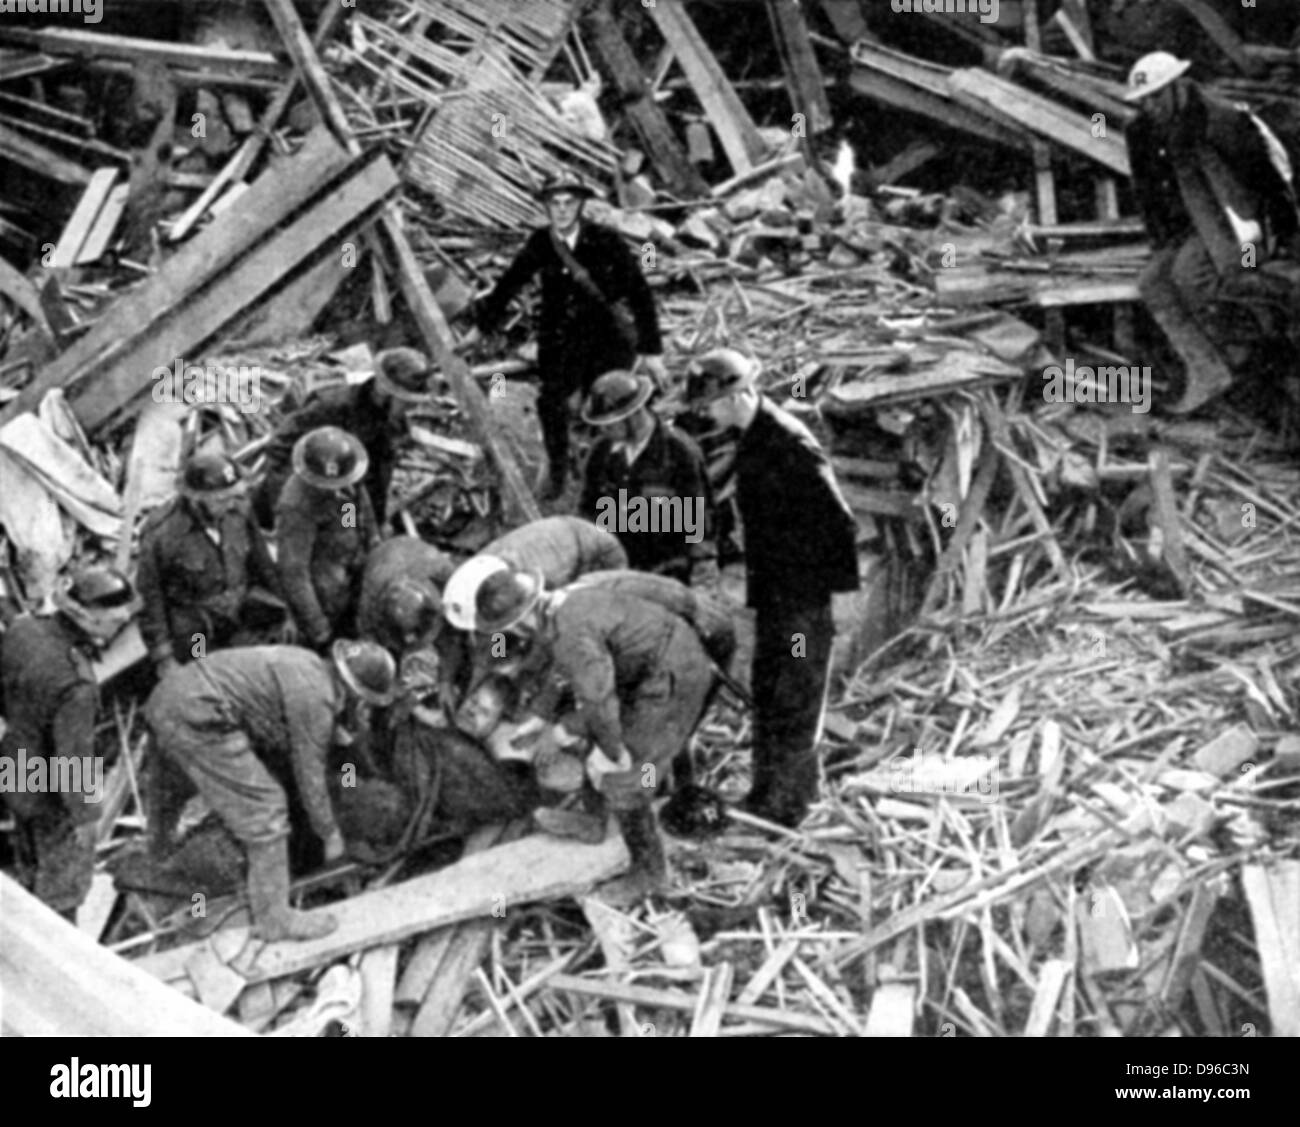 Rescue workers releasing injured person from the debris of a building destroyed by German bombing: 1940.  World War II. Stock Photo